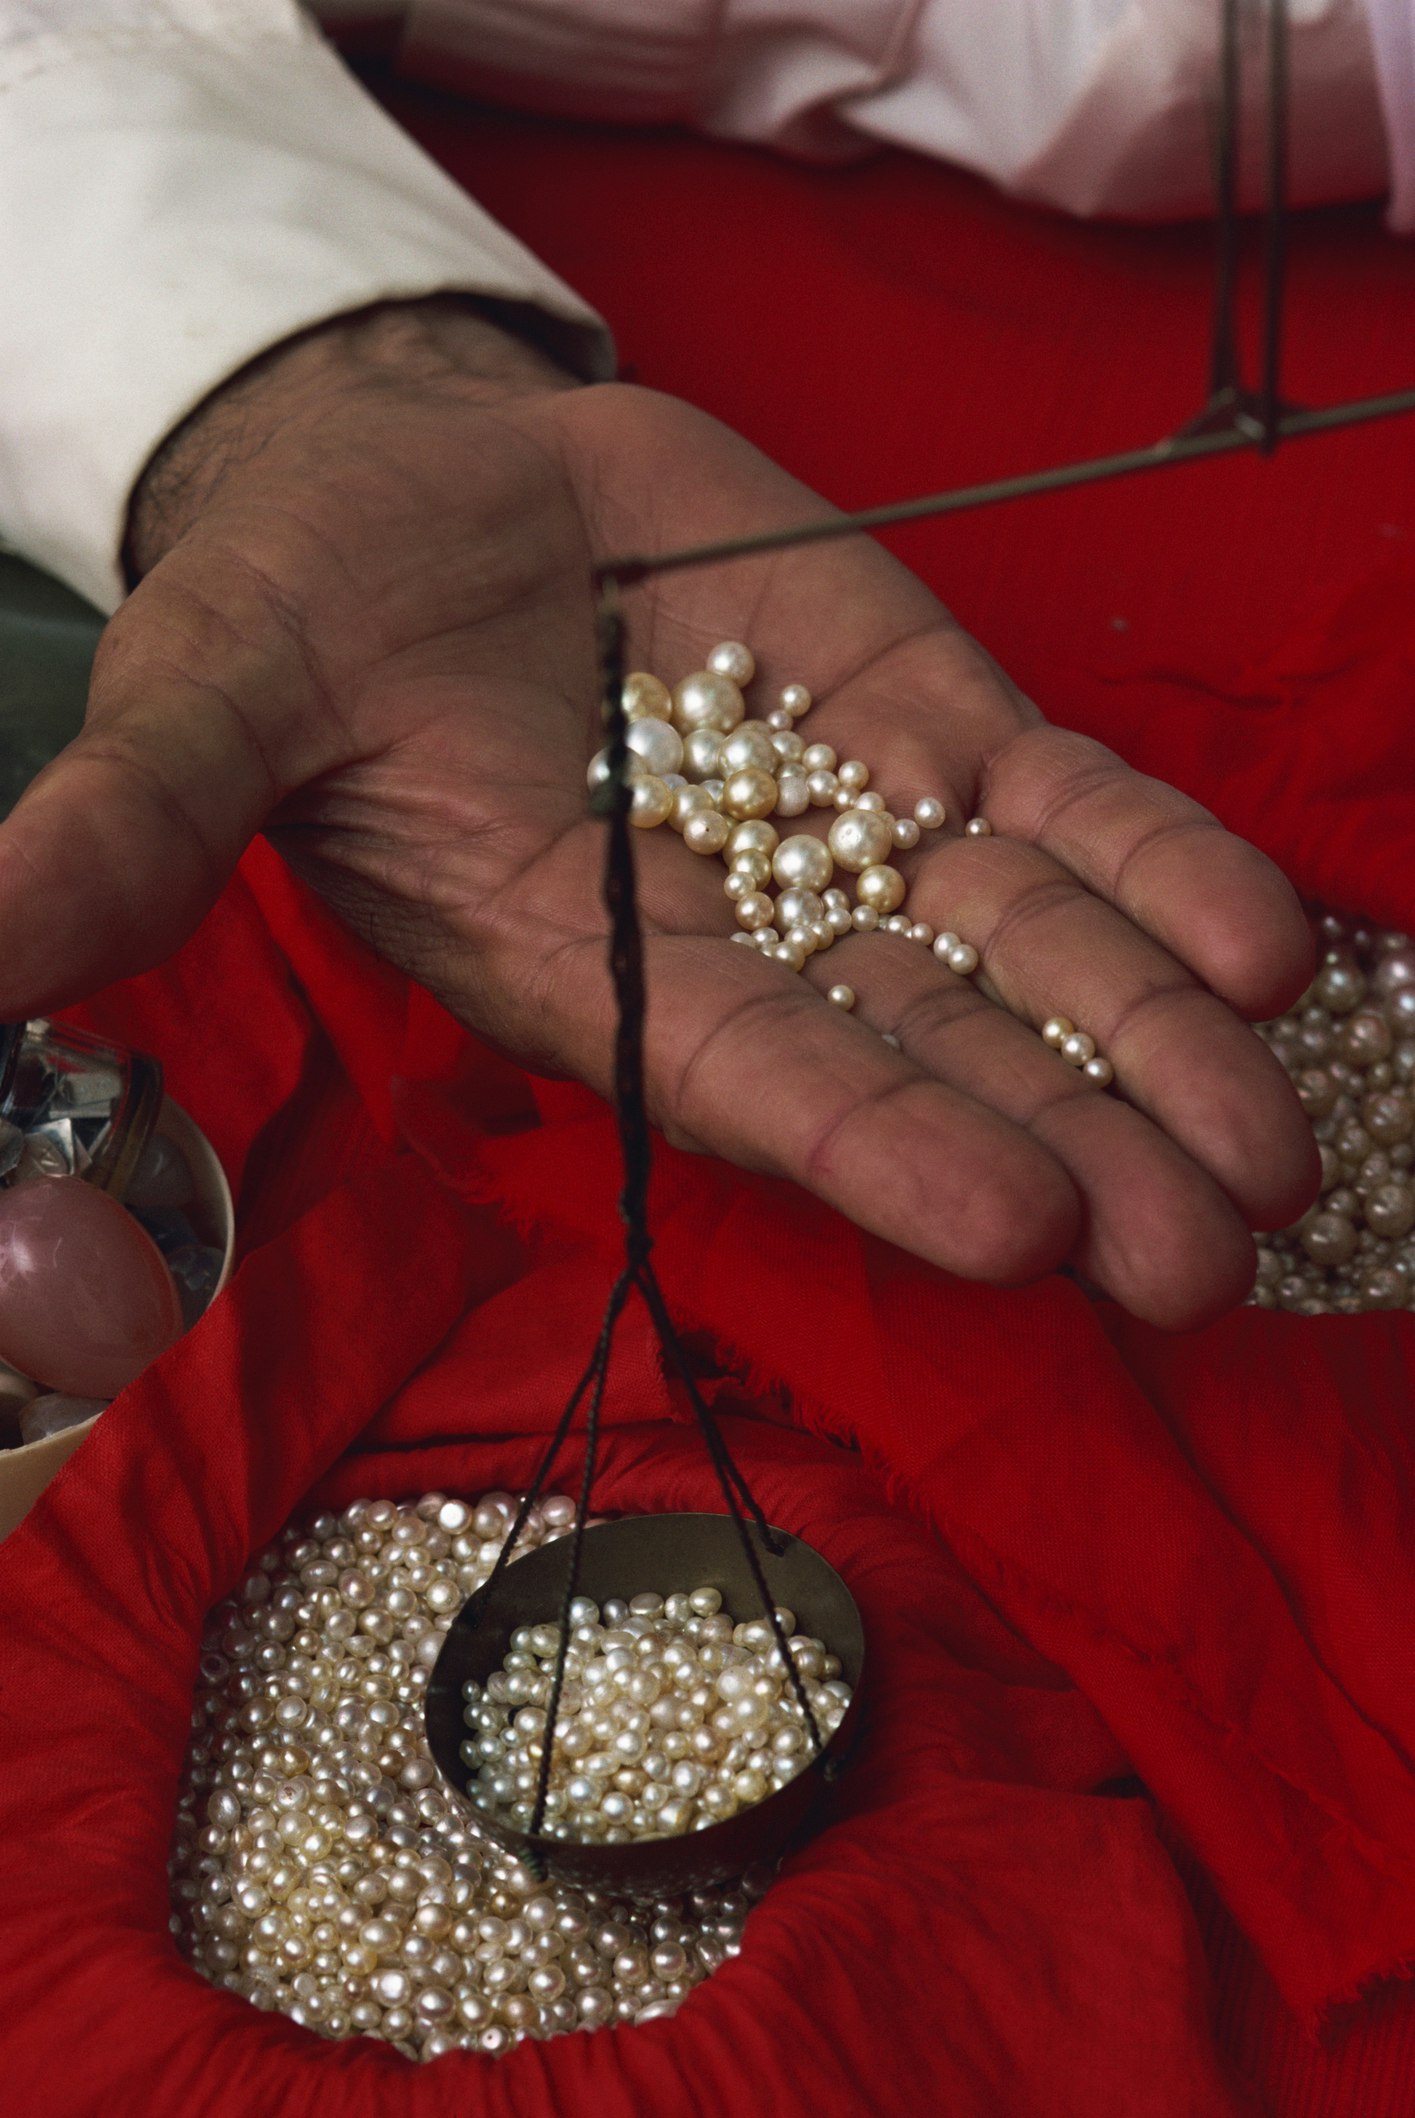 Travel News - Close-up of hand displaying pearls with weighing scales, in the pearl souk, Manama, Bahrain, Middle East